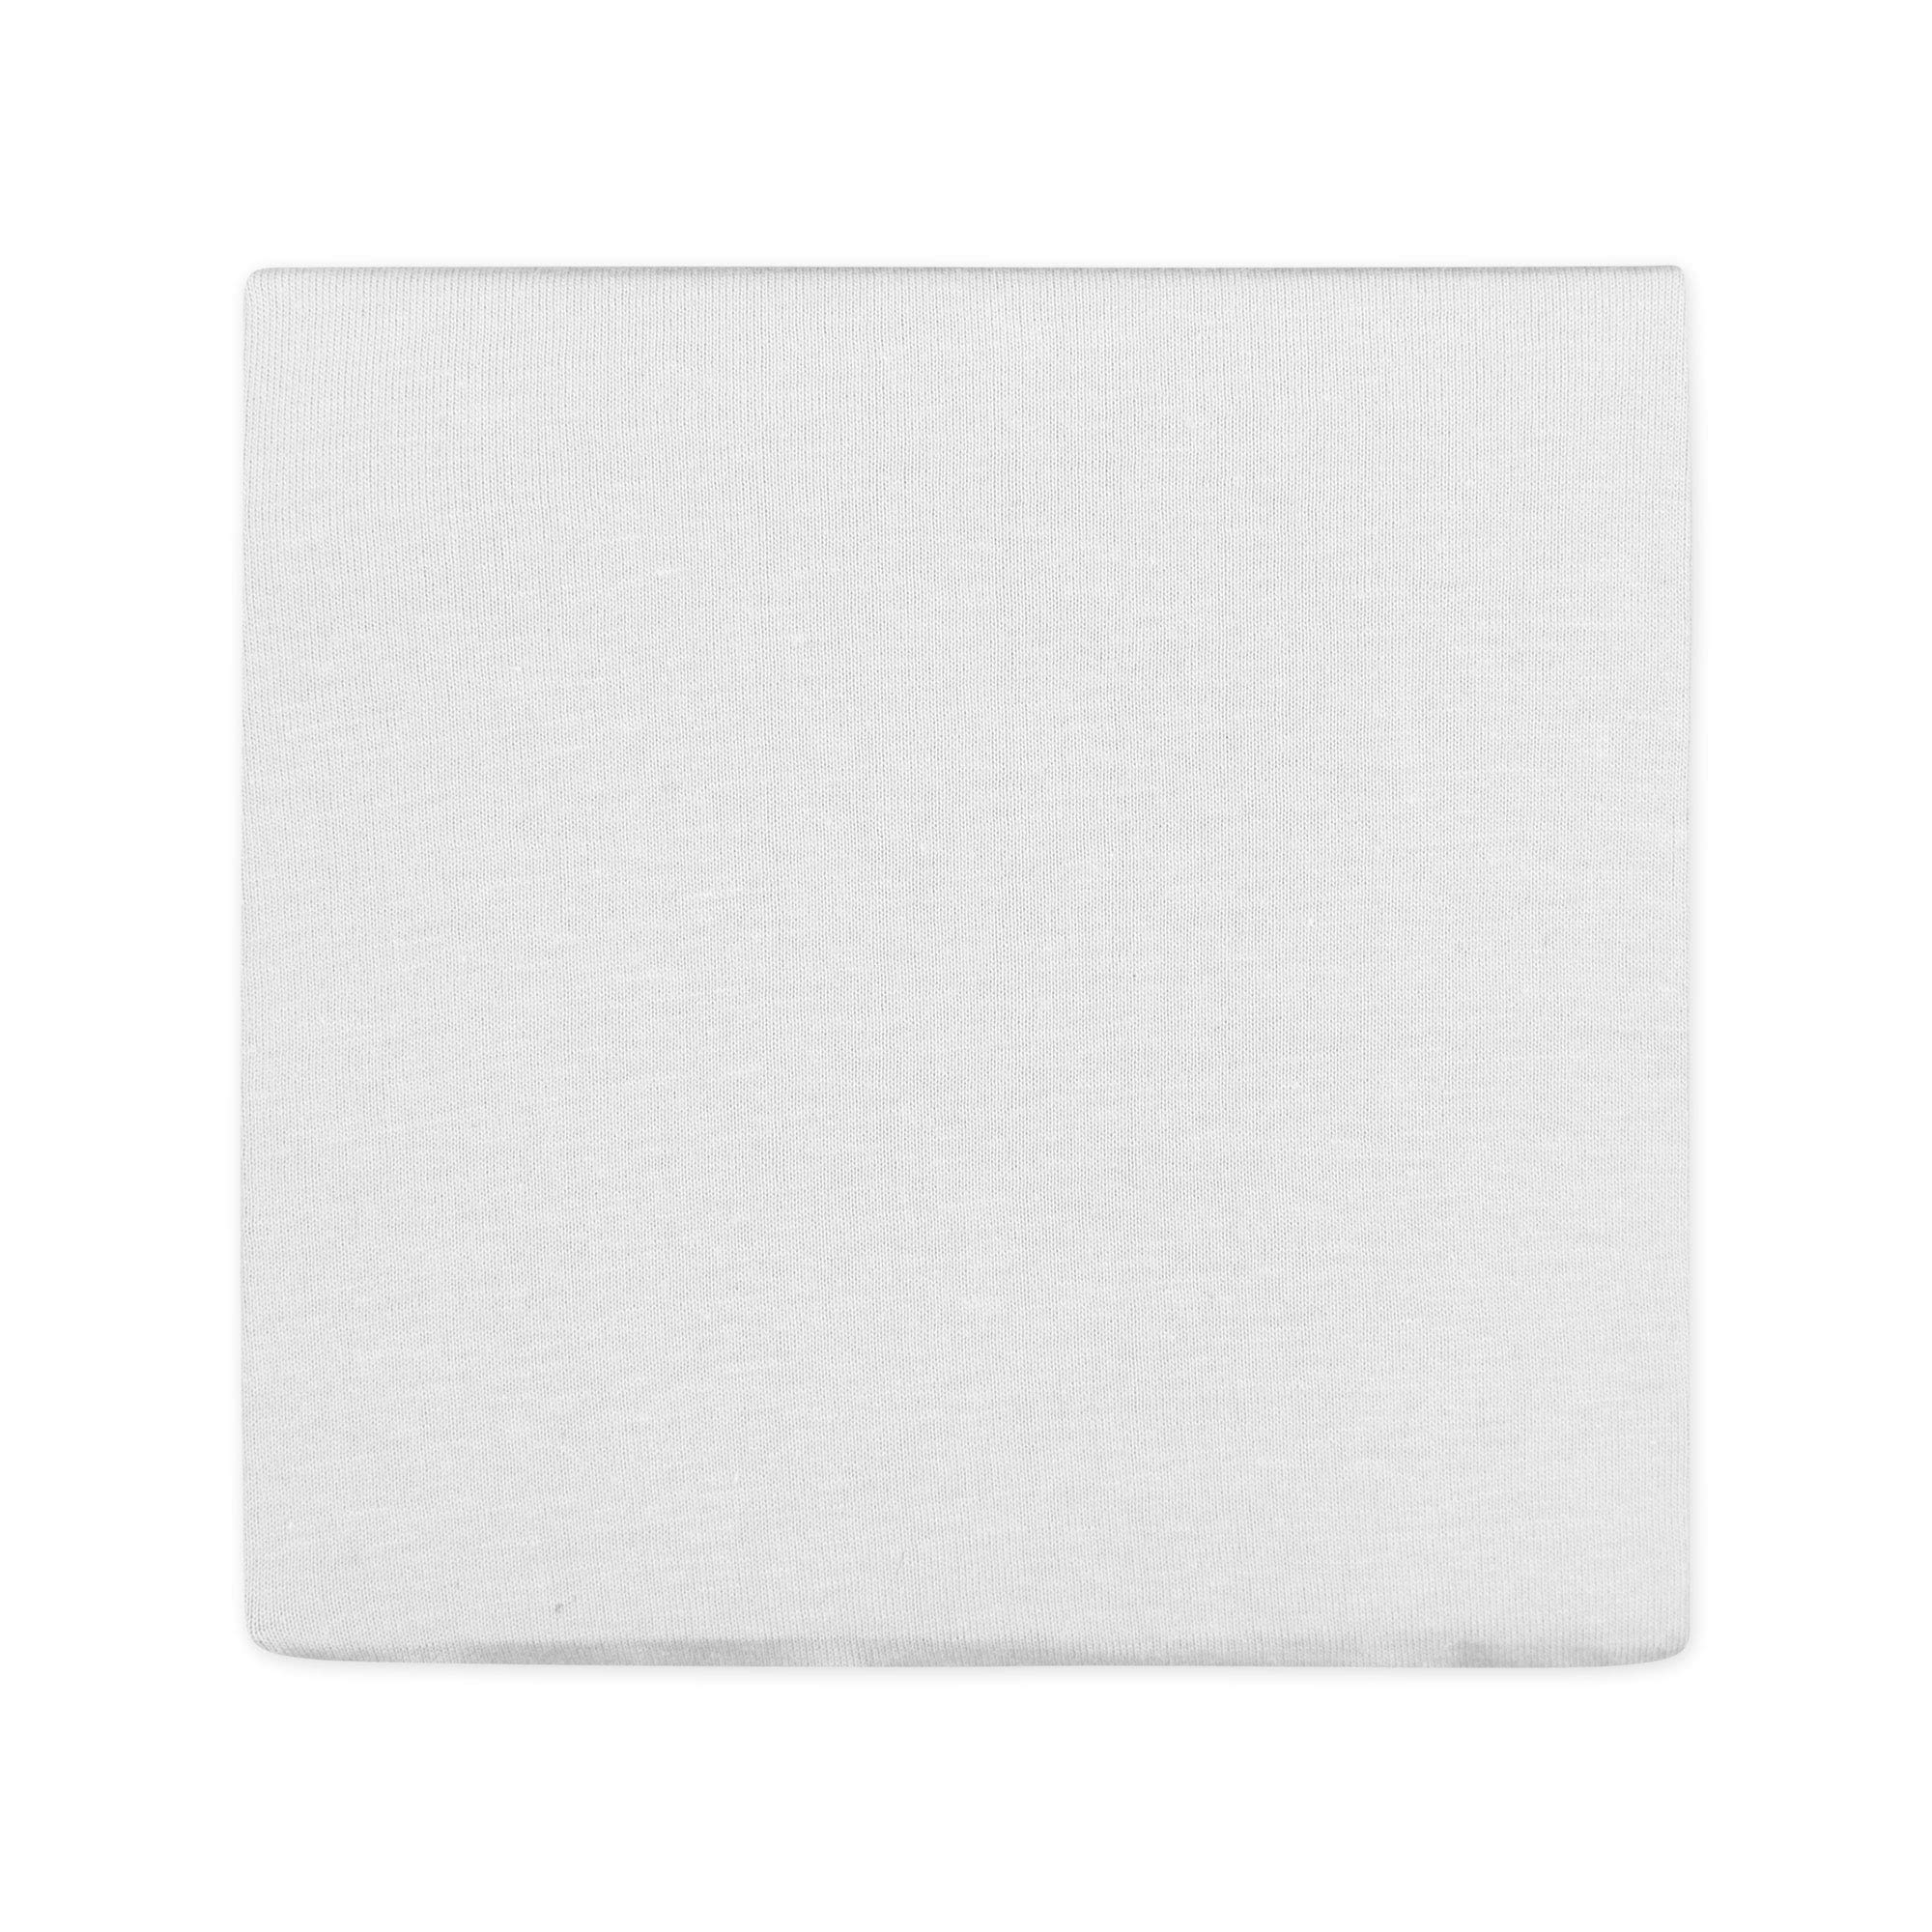 HonestBaby unisex baby Organic Cotton Changing Pad Cover and Toddler Sleepers, Bright White, One Size US